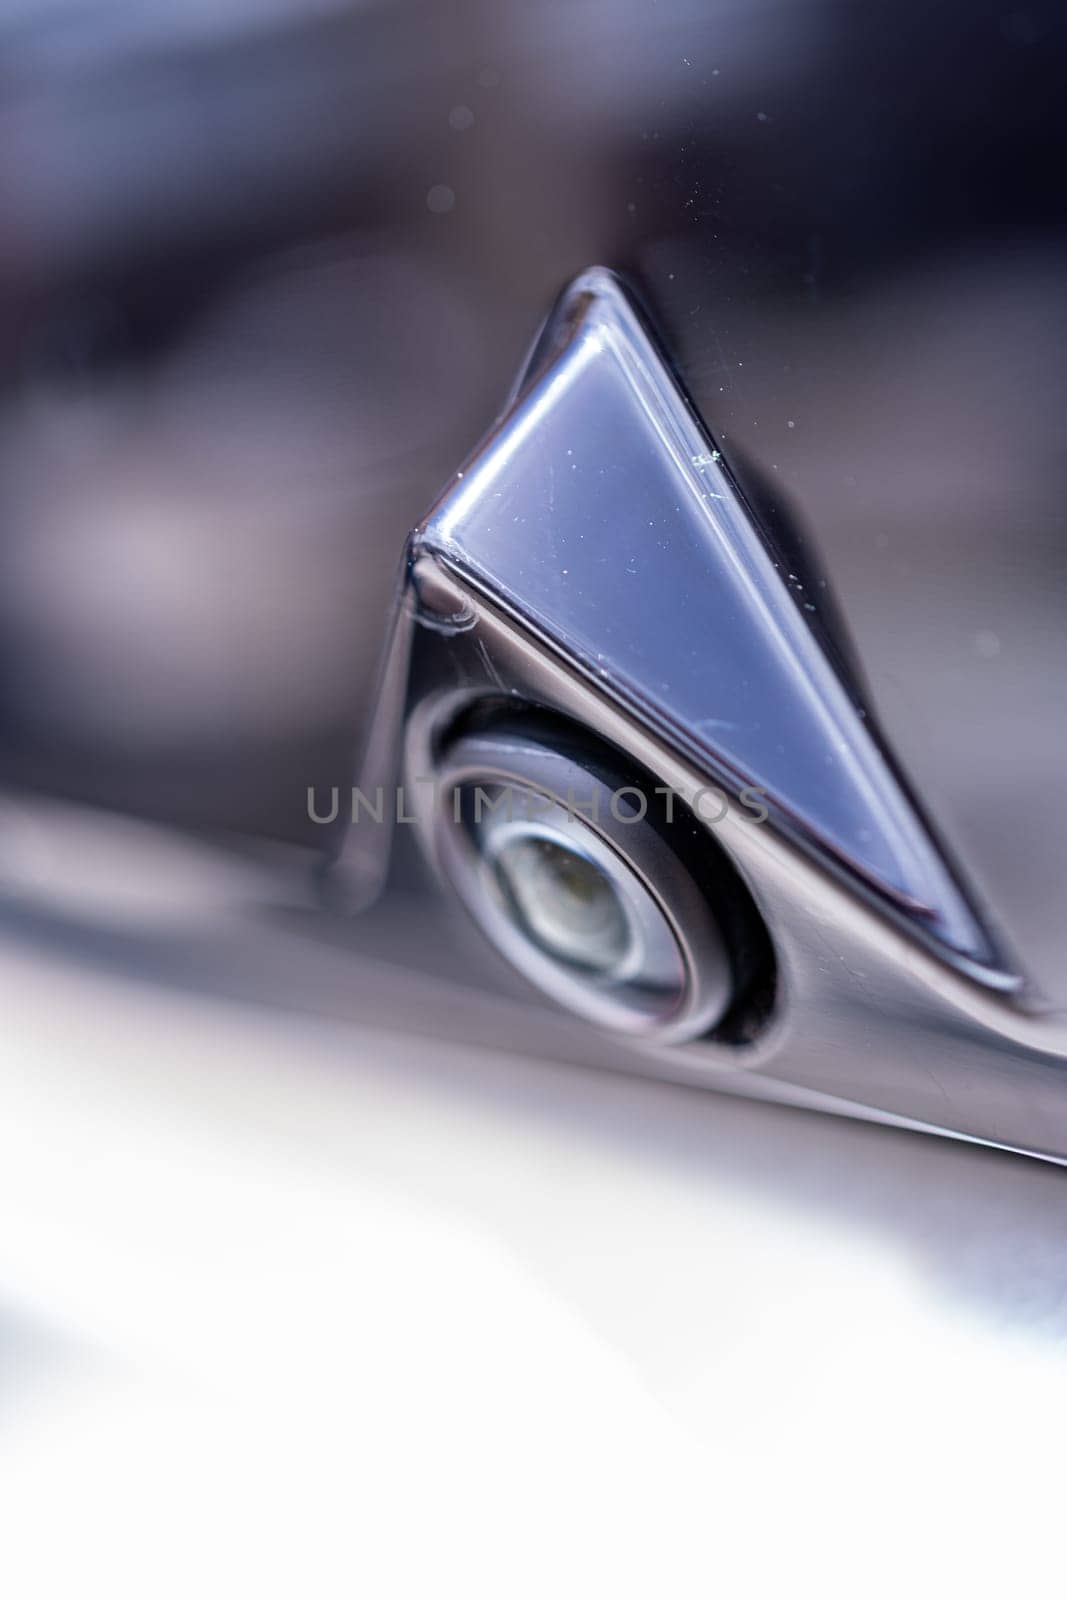 Denver, Colorado, USA-May 5, 2024-This image features a close-up view of the rear camera on a Tesla Cybertruck, highlighting the sleek, triangular design and the integration into the vehicle exterior.